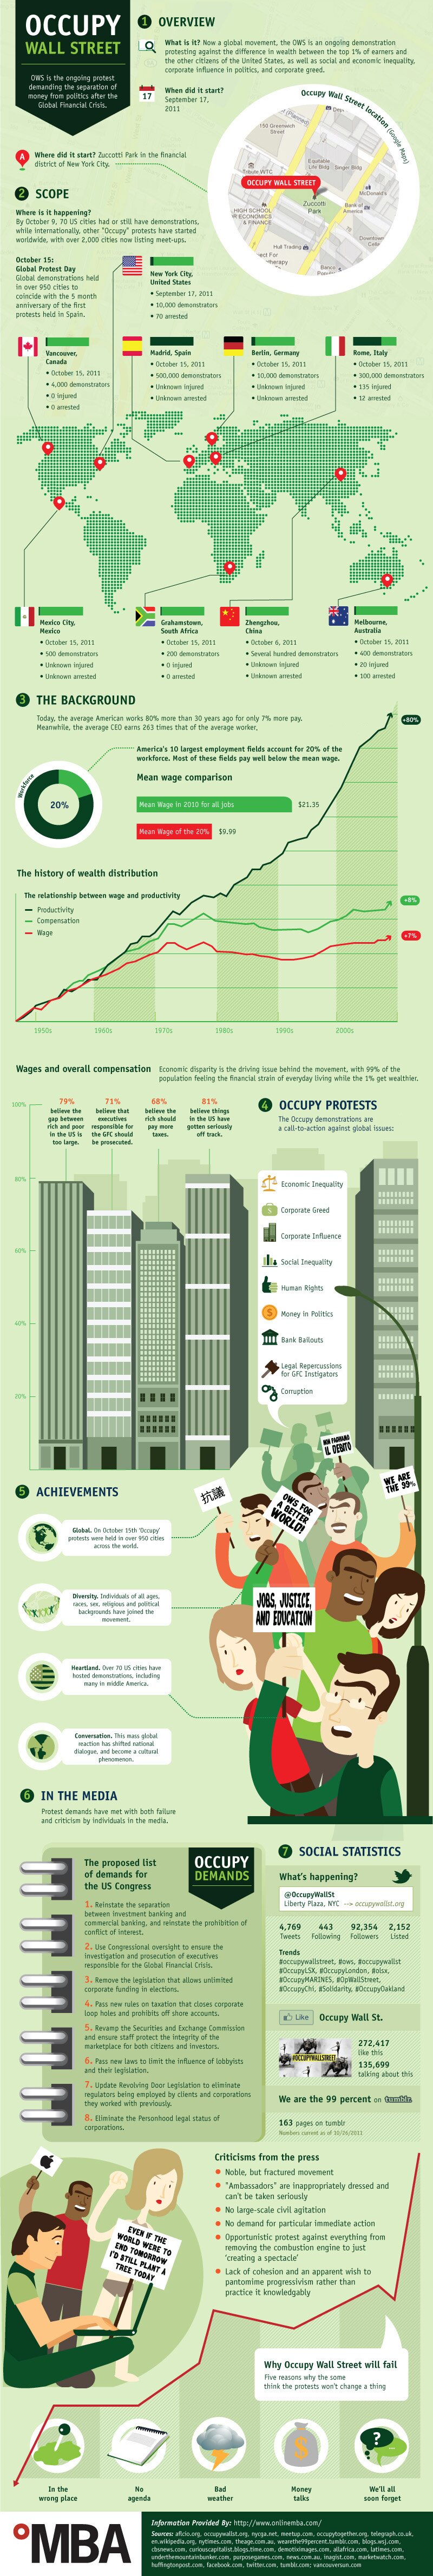 Global-Impact-of-Occupy-Wall-Street